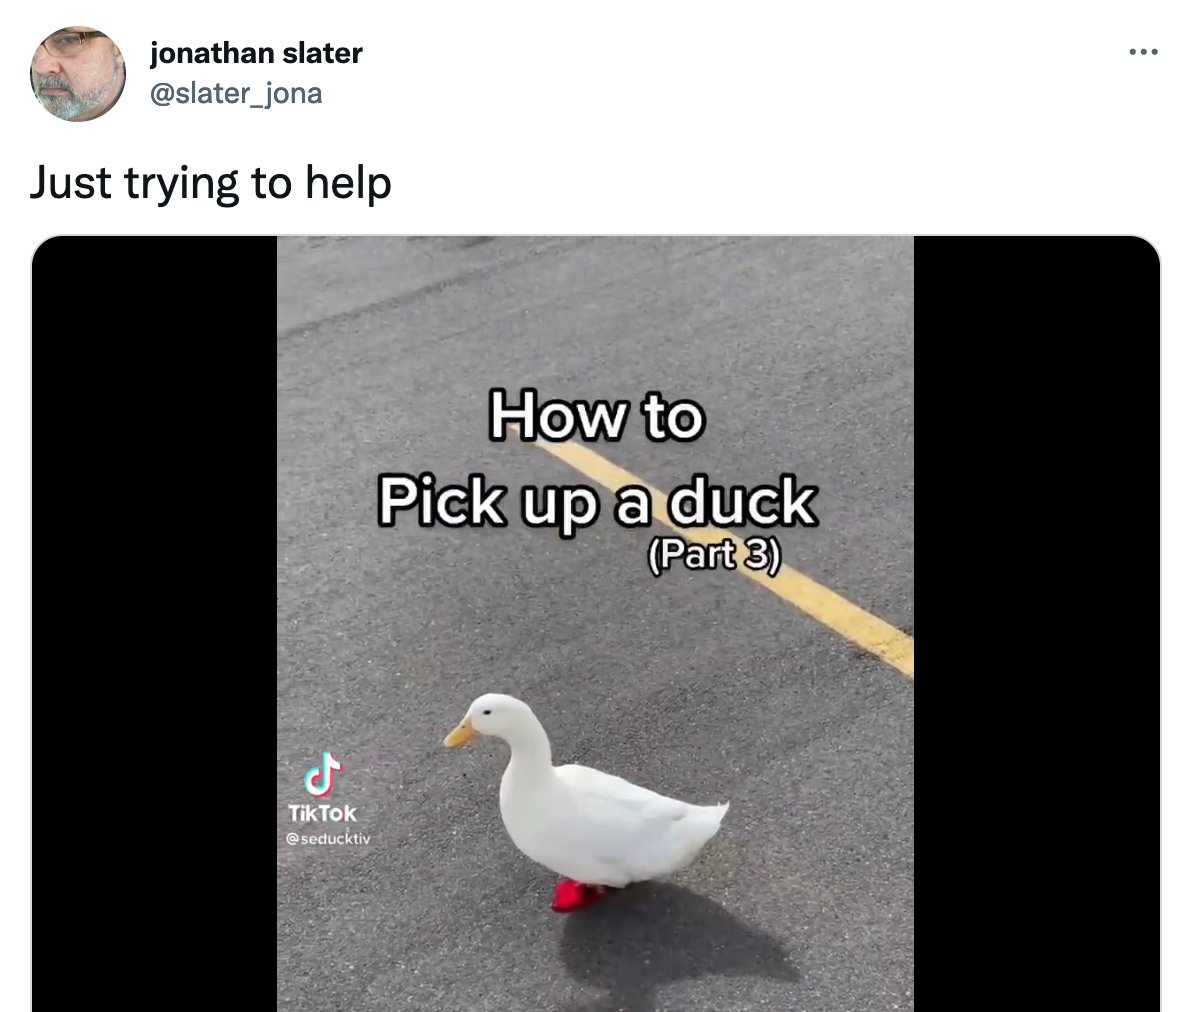 TikTok video with the headline "How to pick up a duck"